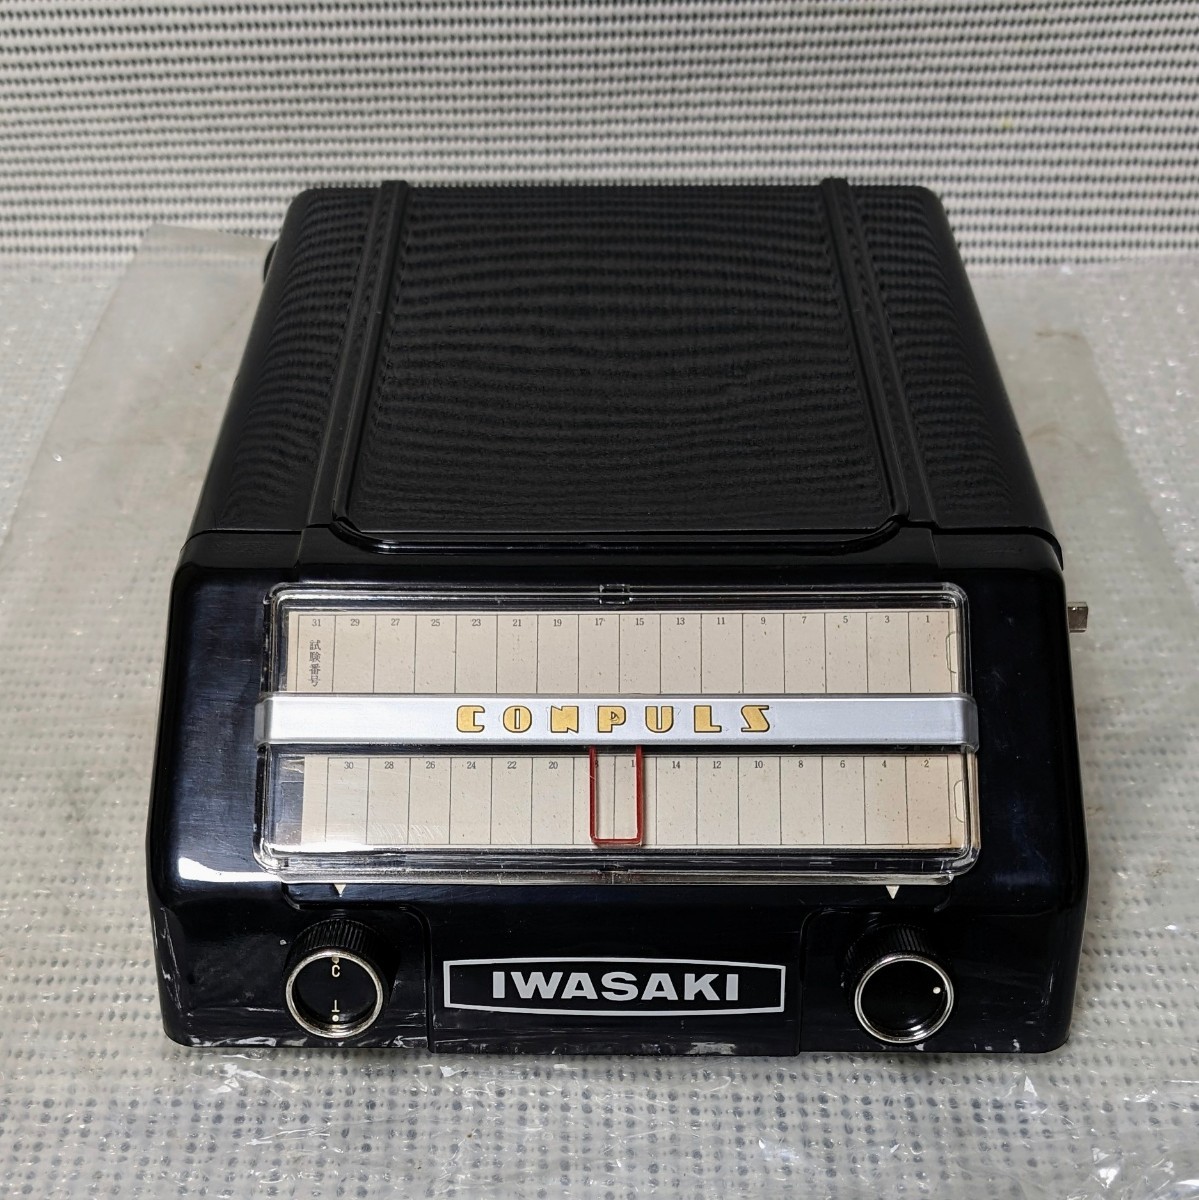  unused storage goods Showa Retro that time thing rare rare IWASAKI CONPULS Iwatsu Electric black telephone for automatic dial navy blue Pal s details no check Showa era 42 year made present condition goods 